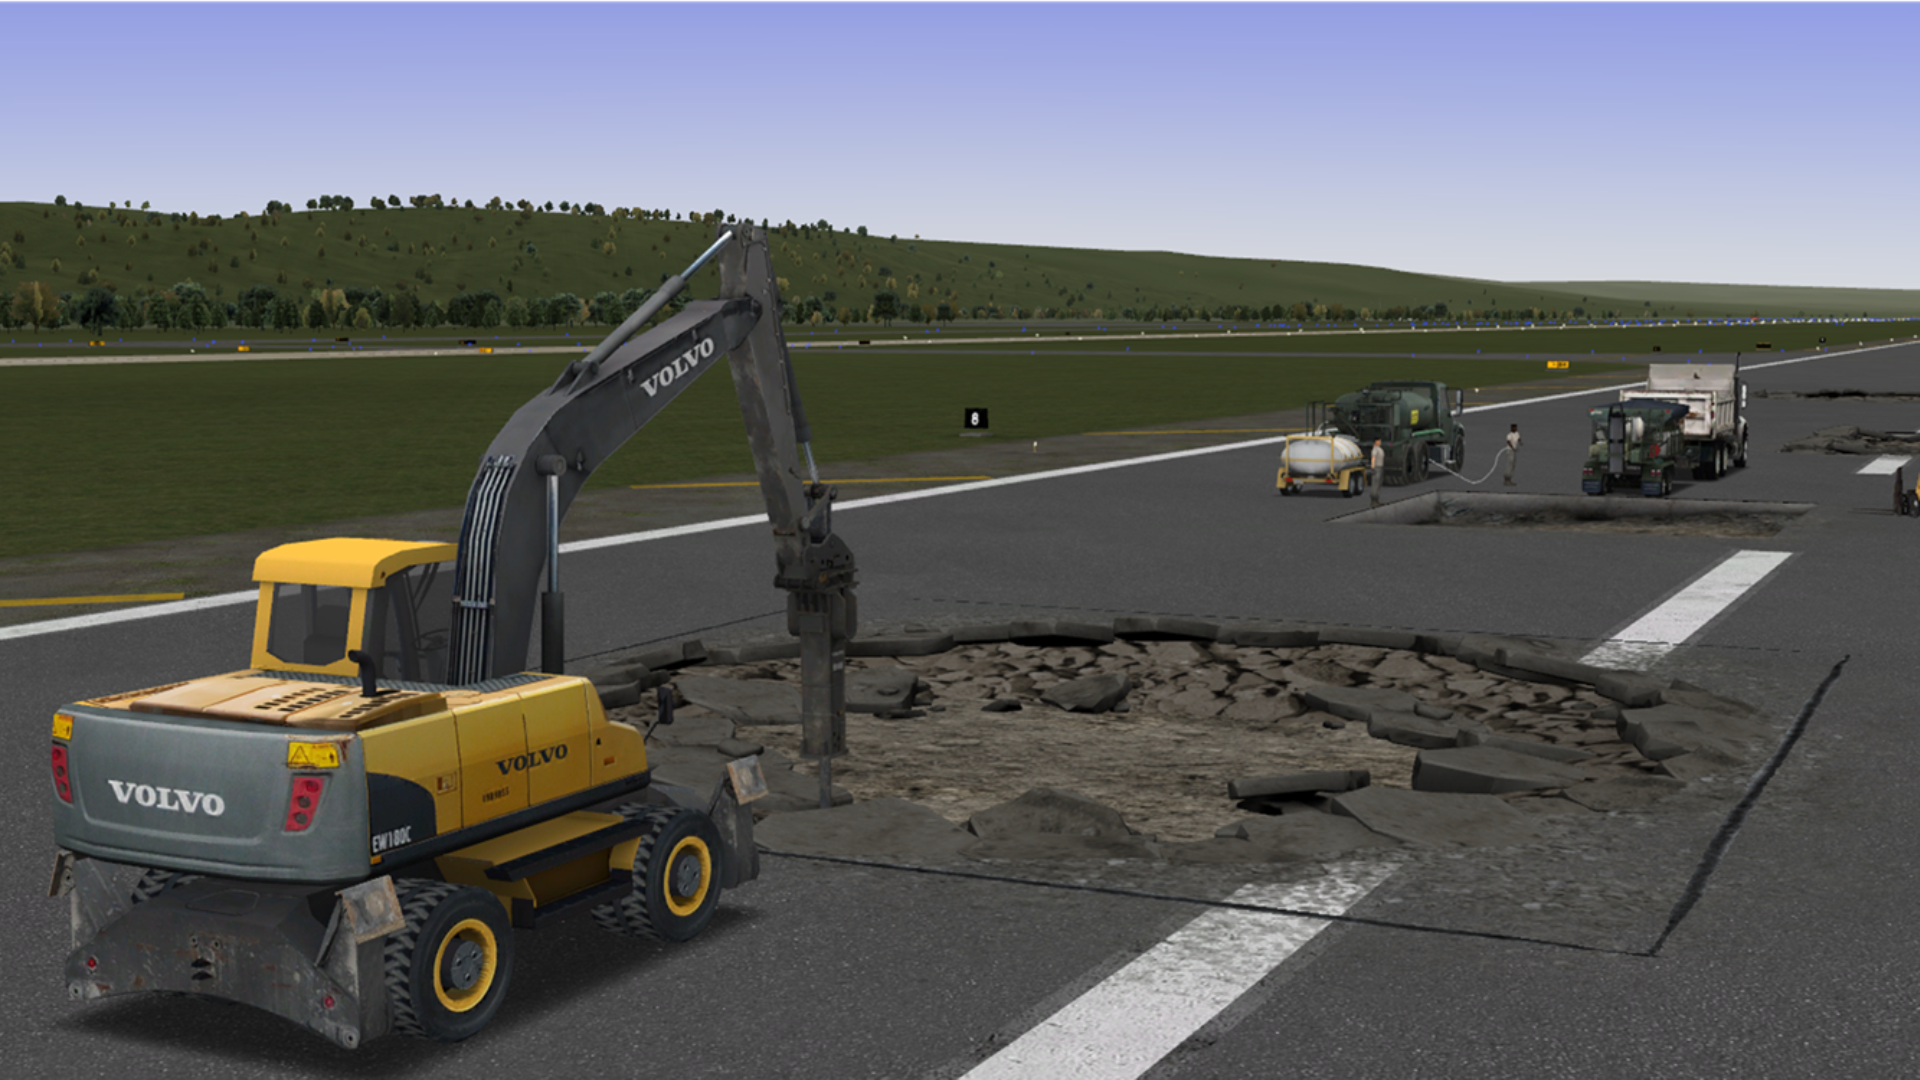 Airfield Damage Repair Training inside our ADMS Training System. Various types of damage and resources available.